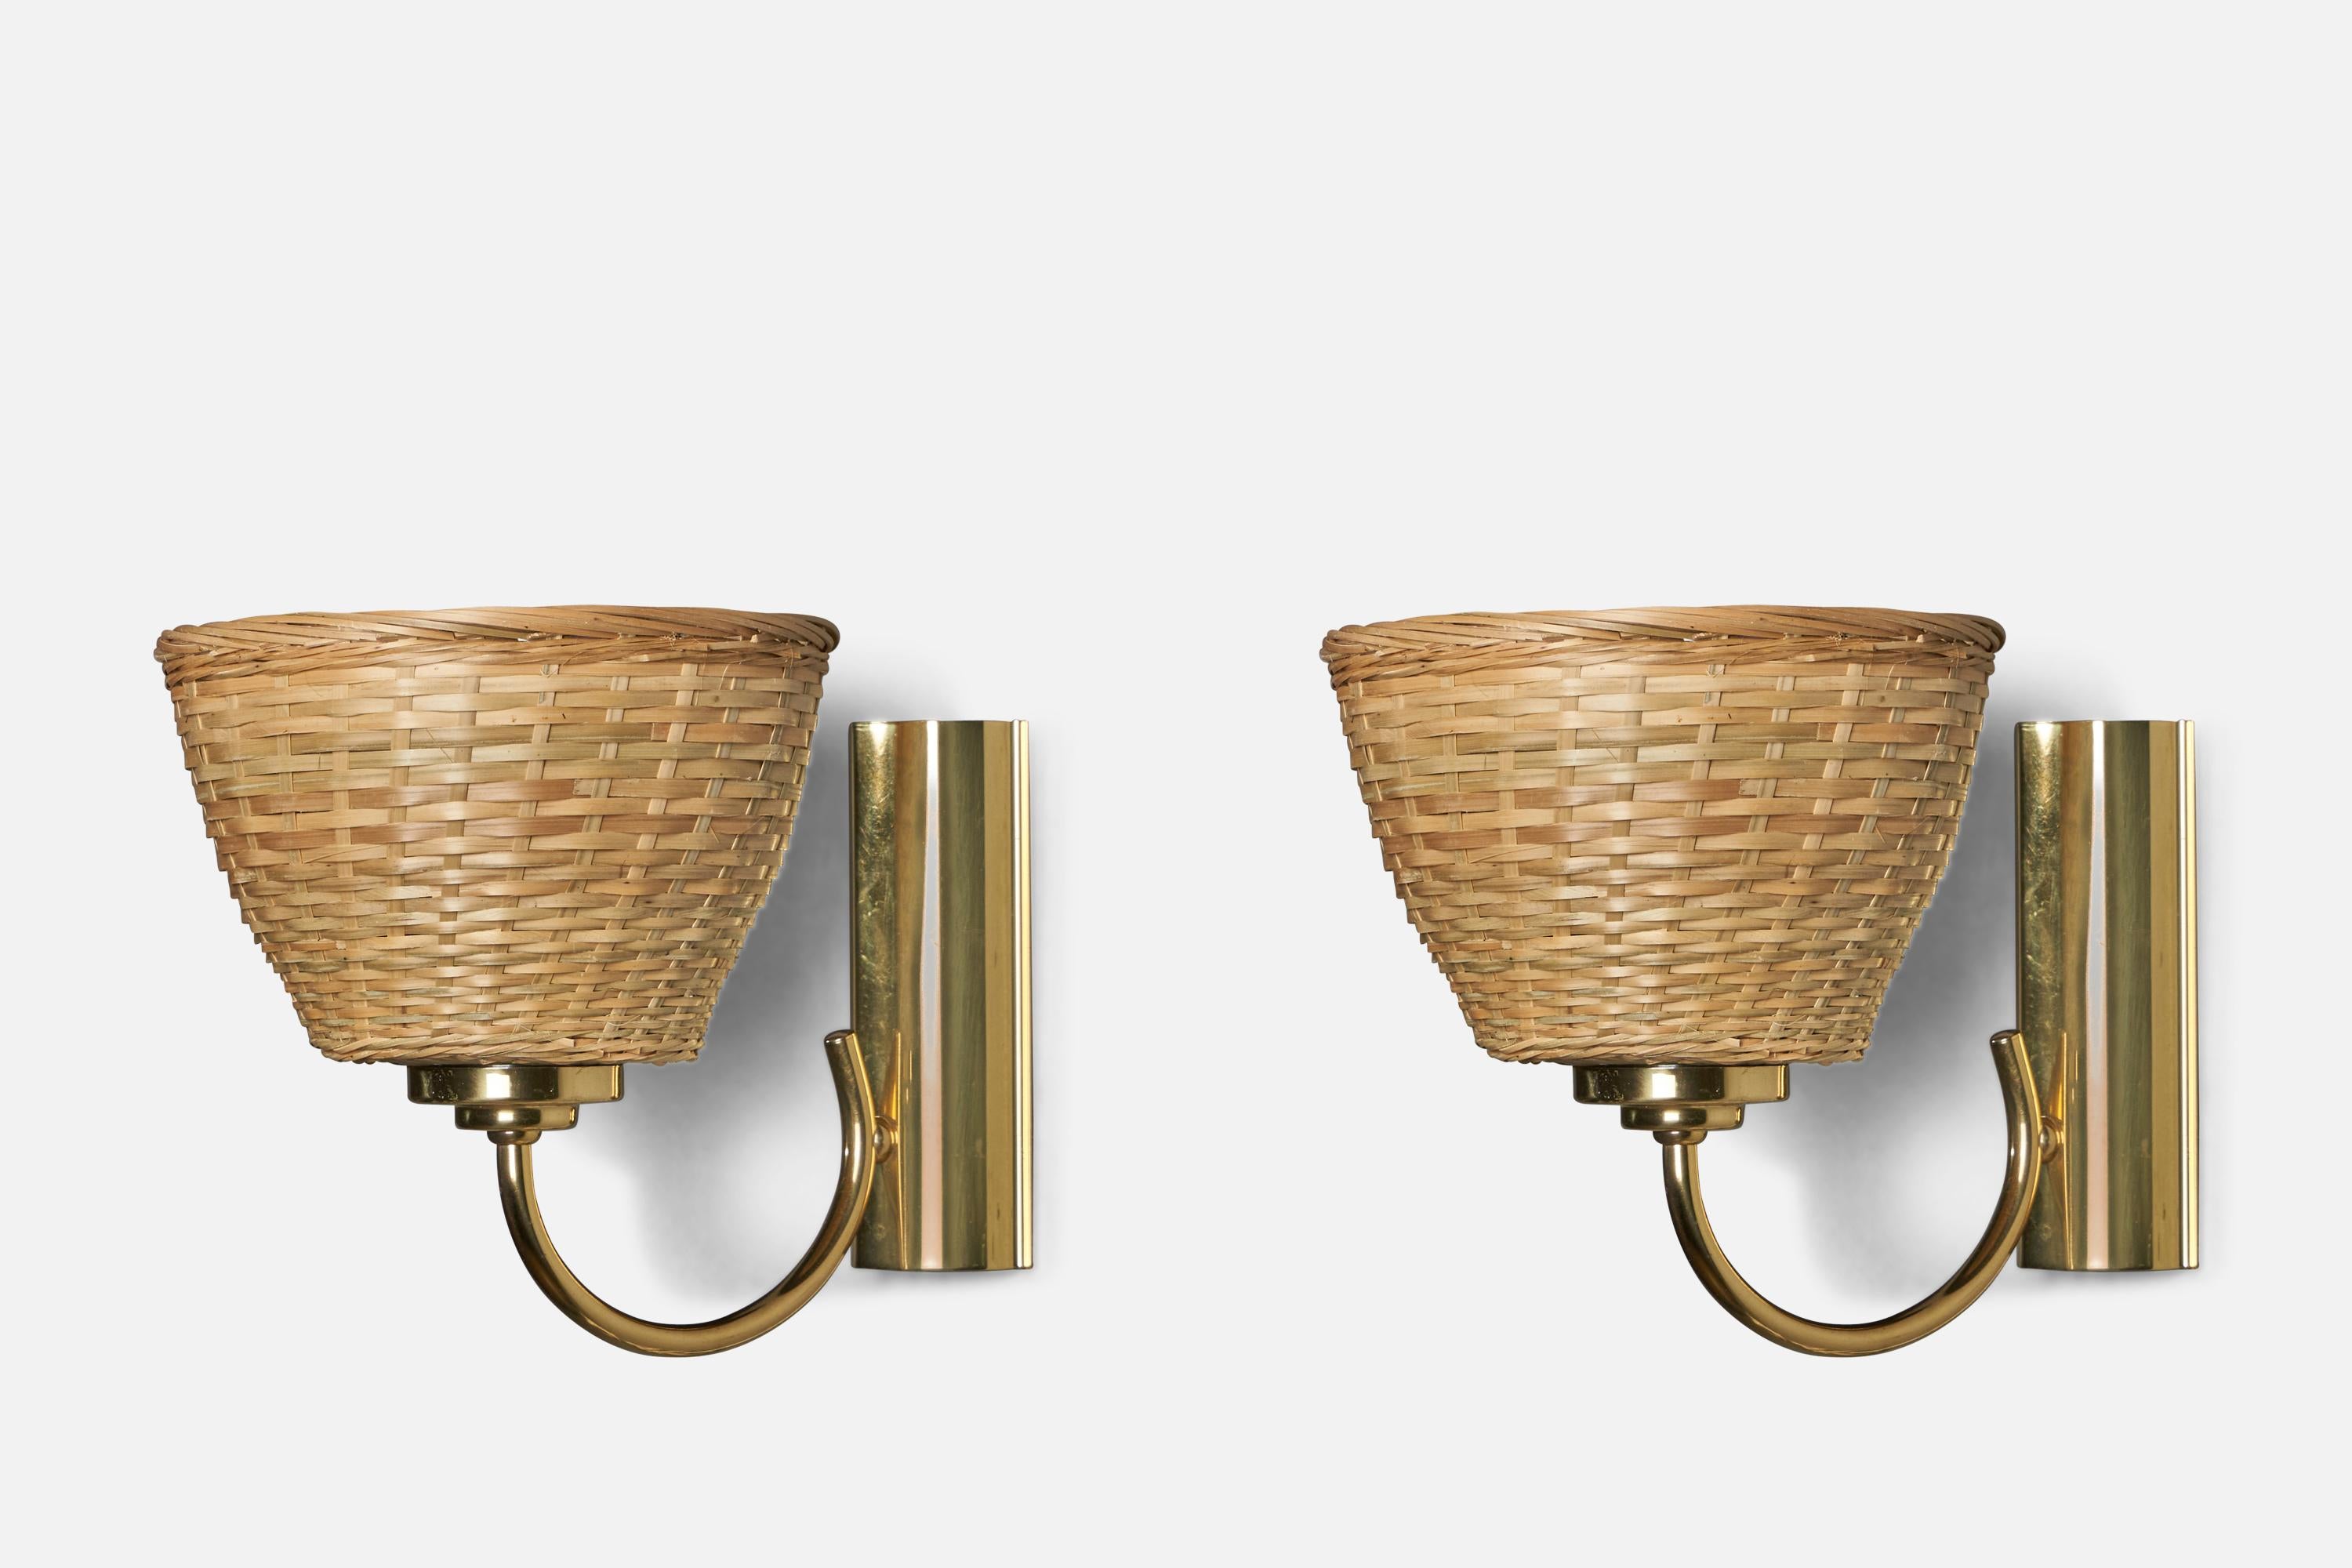  A pair of brass and rattan wall lights designed and produced in Sweden, 1970s.

Overall Dimensions (inches): 8.25” H x 7” W x 10” D
Back Plate Dimensions (inches): 6” H x 2.5” W x 1.25” D
Bulb Specifications: E-26 Bulb
Number of Sockets: 1